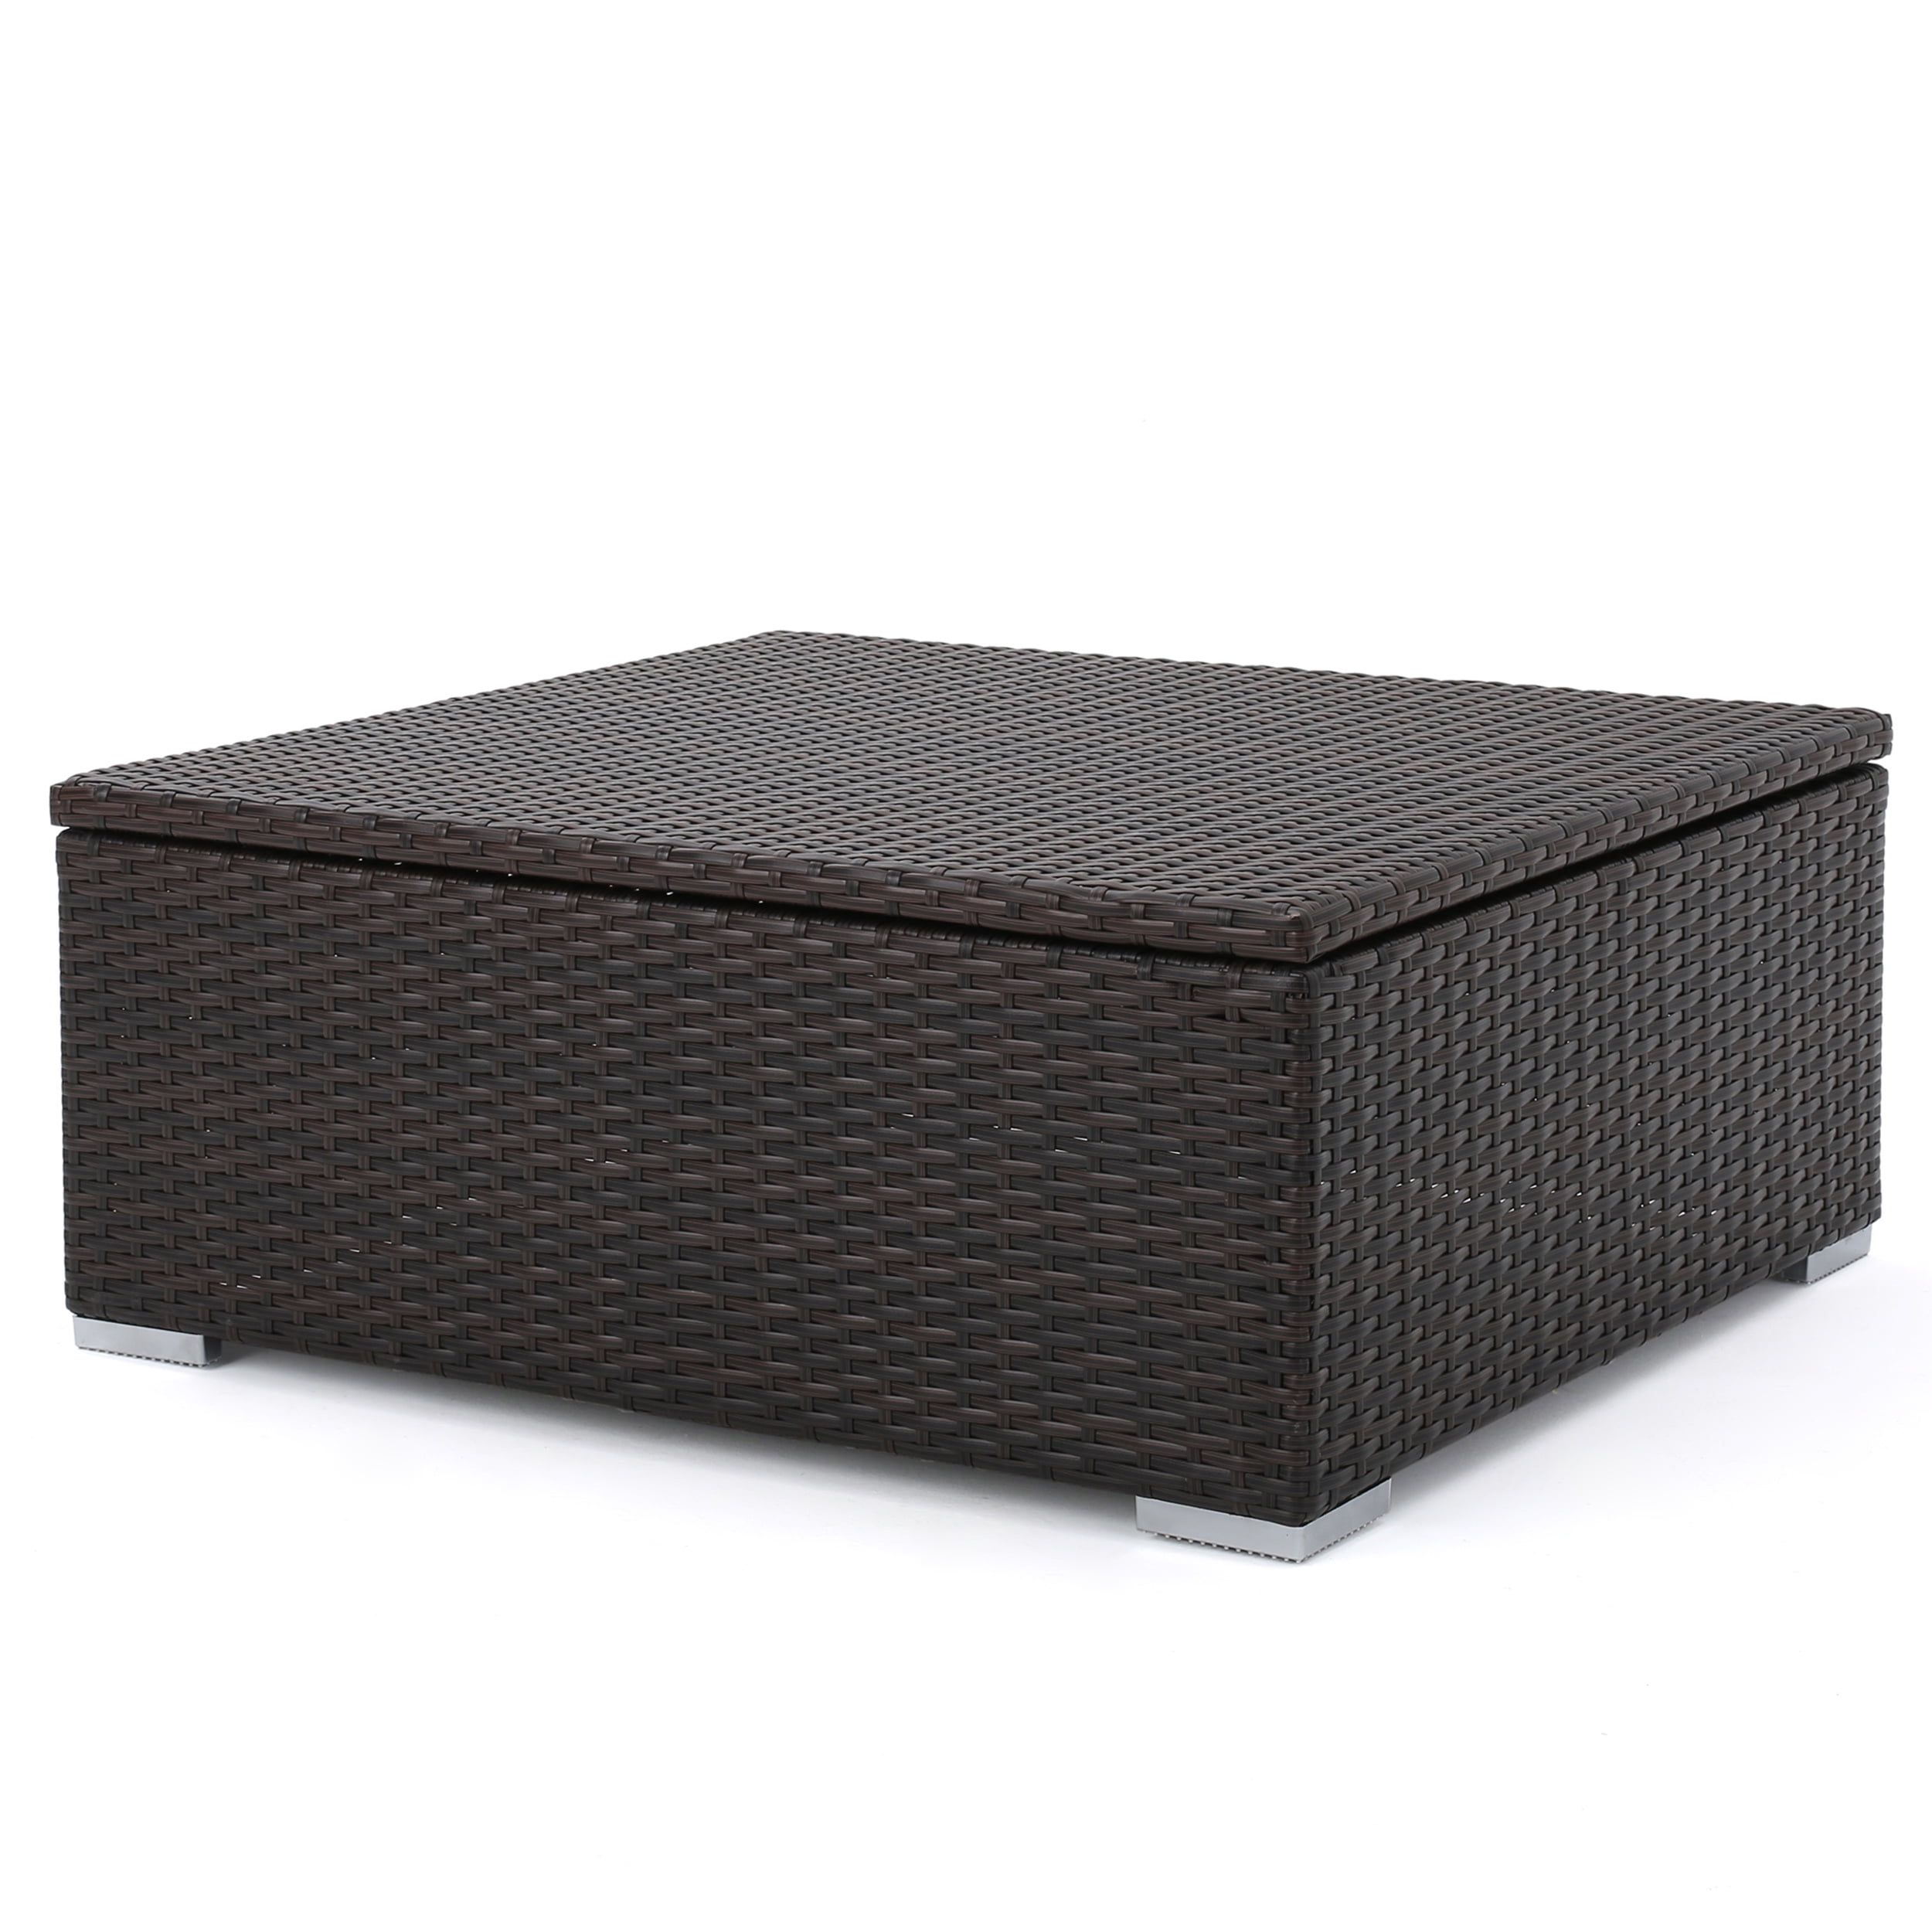 Costa Mesa Outdoor Wicker Coffee Table With Storage, Multibrown Throughout Waterproof Coffee Tables (View 6 of 15)